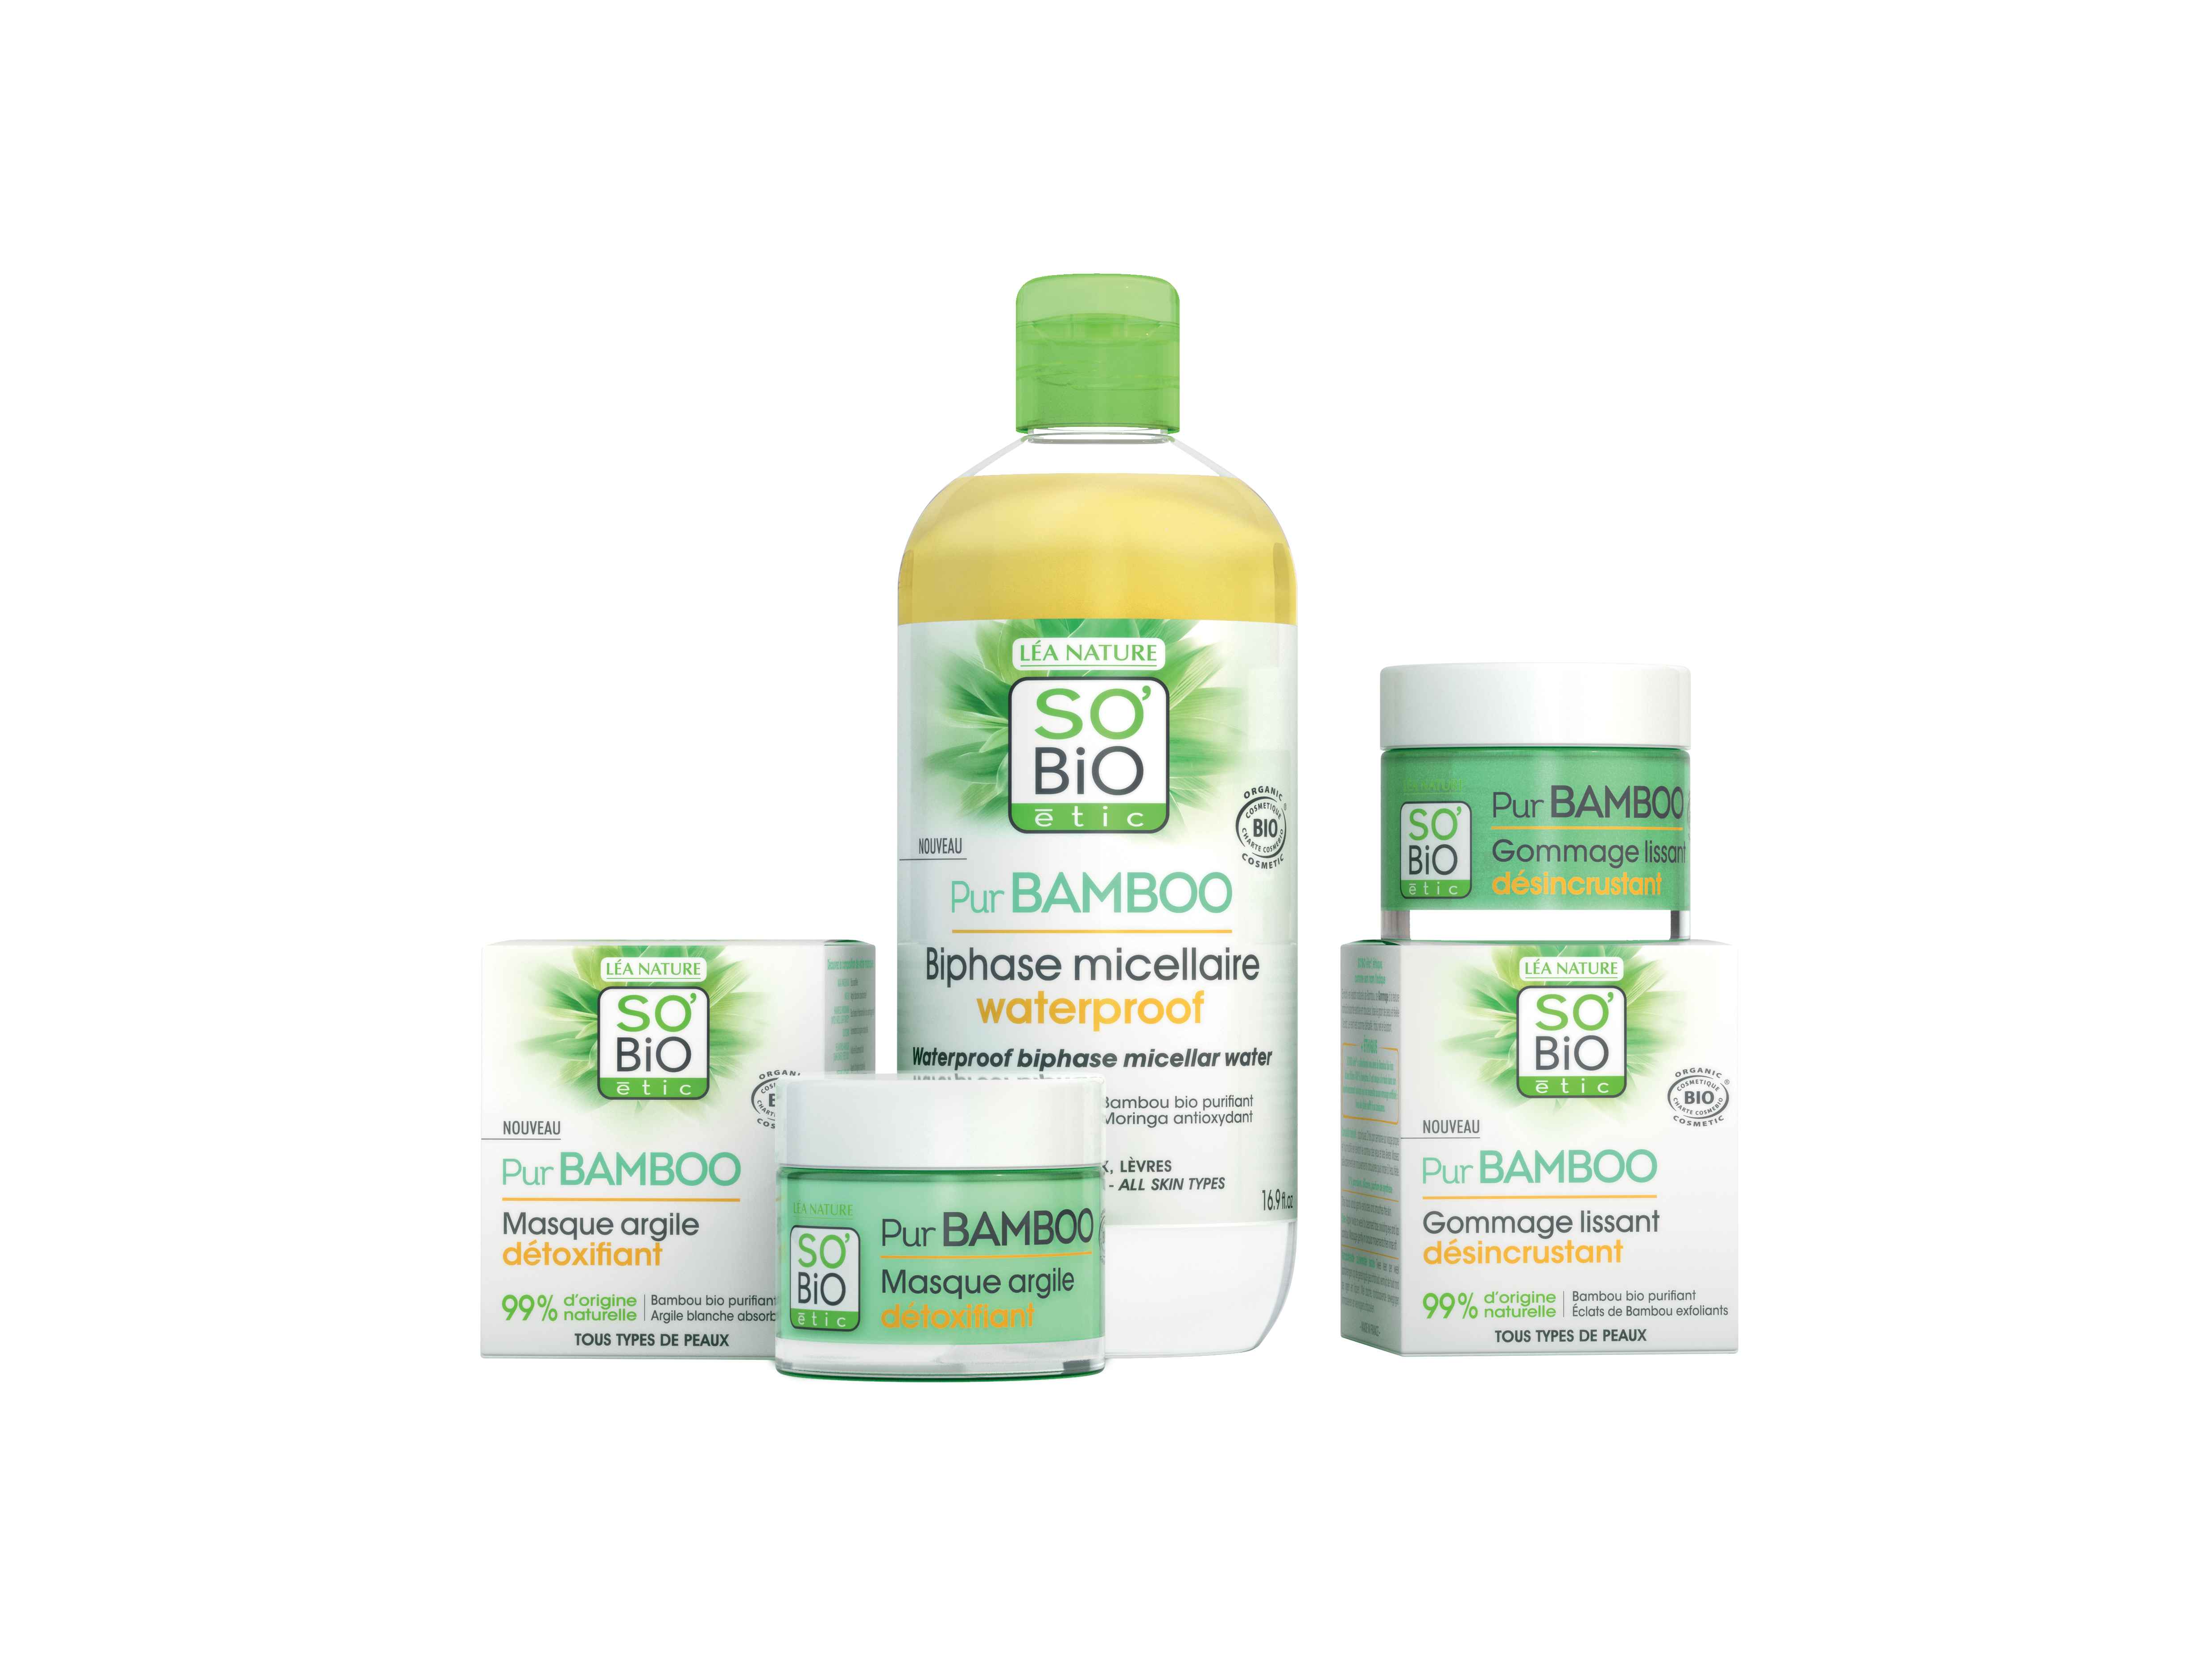 SO’BiO étic® is also bringing to America Pur Bamboo, skincare products that eliminate impurities and purifies the skin. SO’BiO étic® is available on Walmart.com or OneLavi.com.